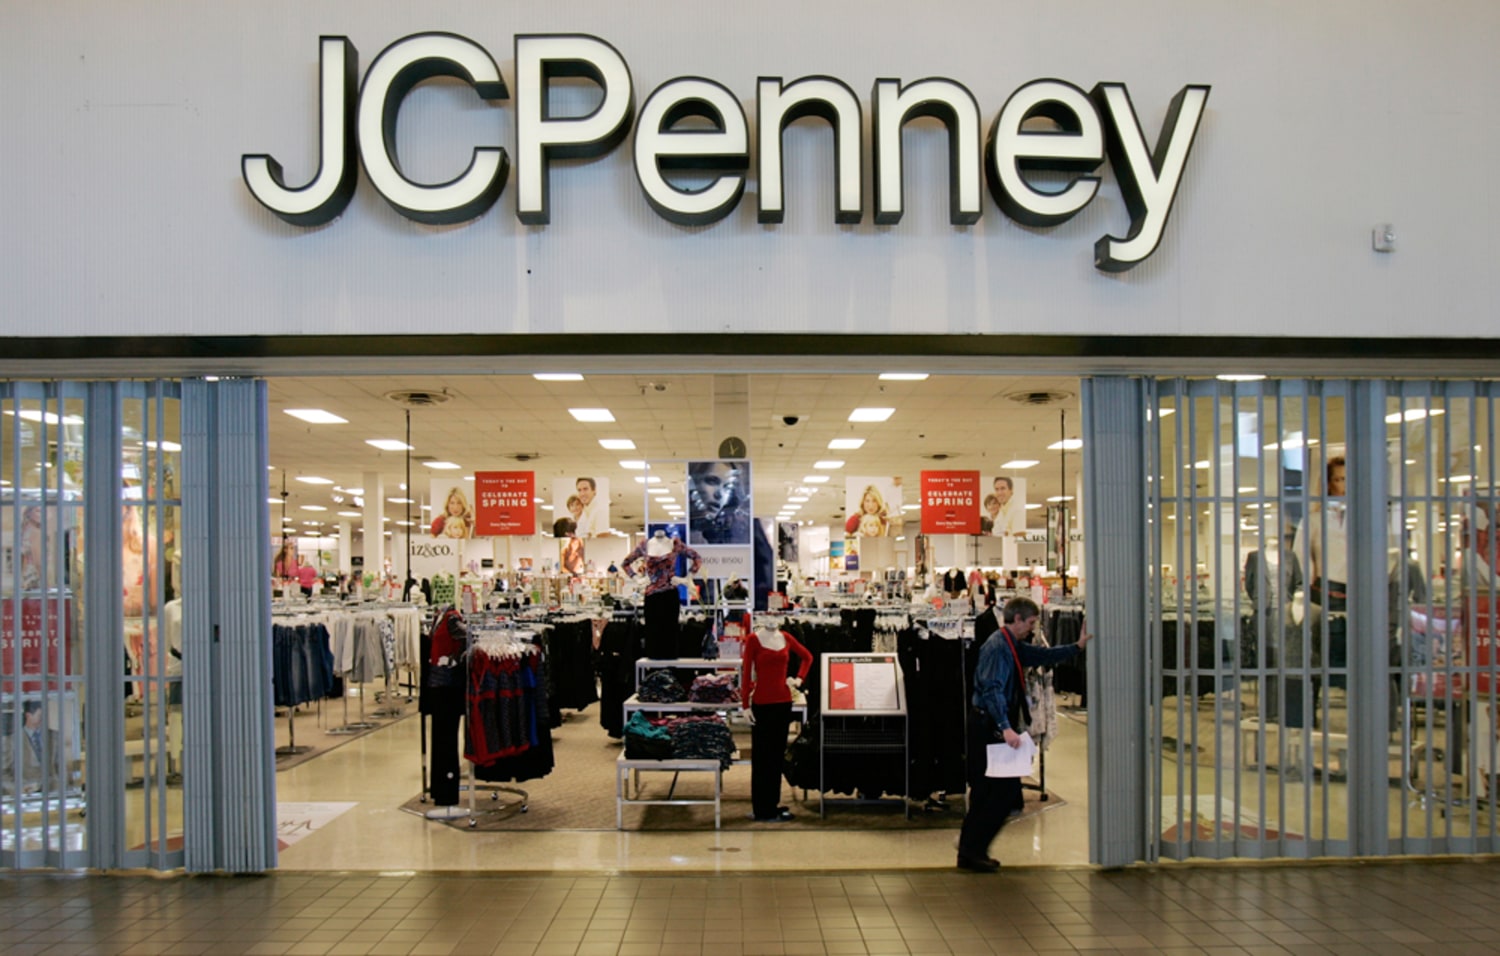 JCPenney Opens Doors After-Hours for Illinois Tech Students at “Suit-Up”  Event